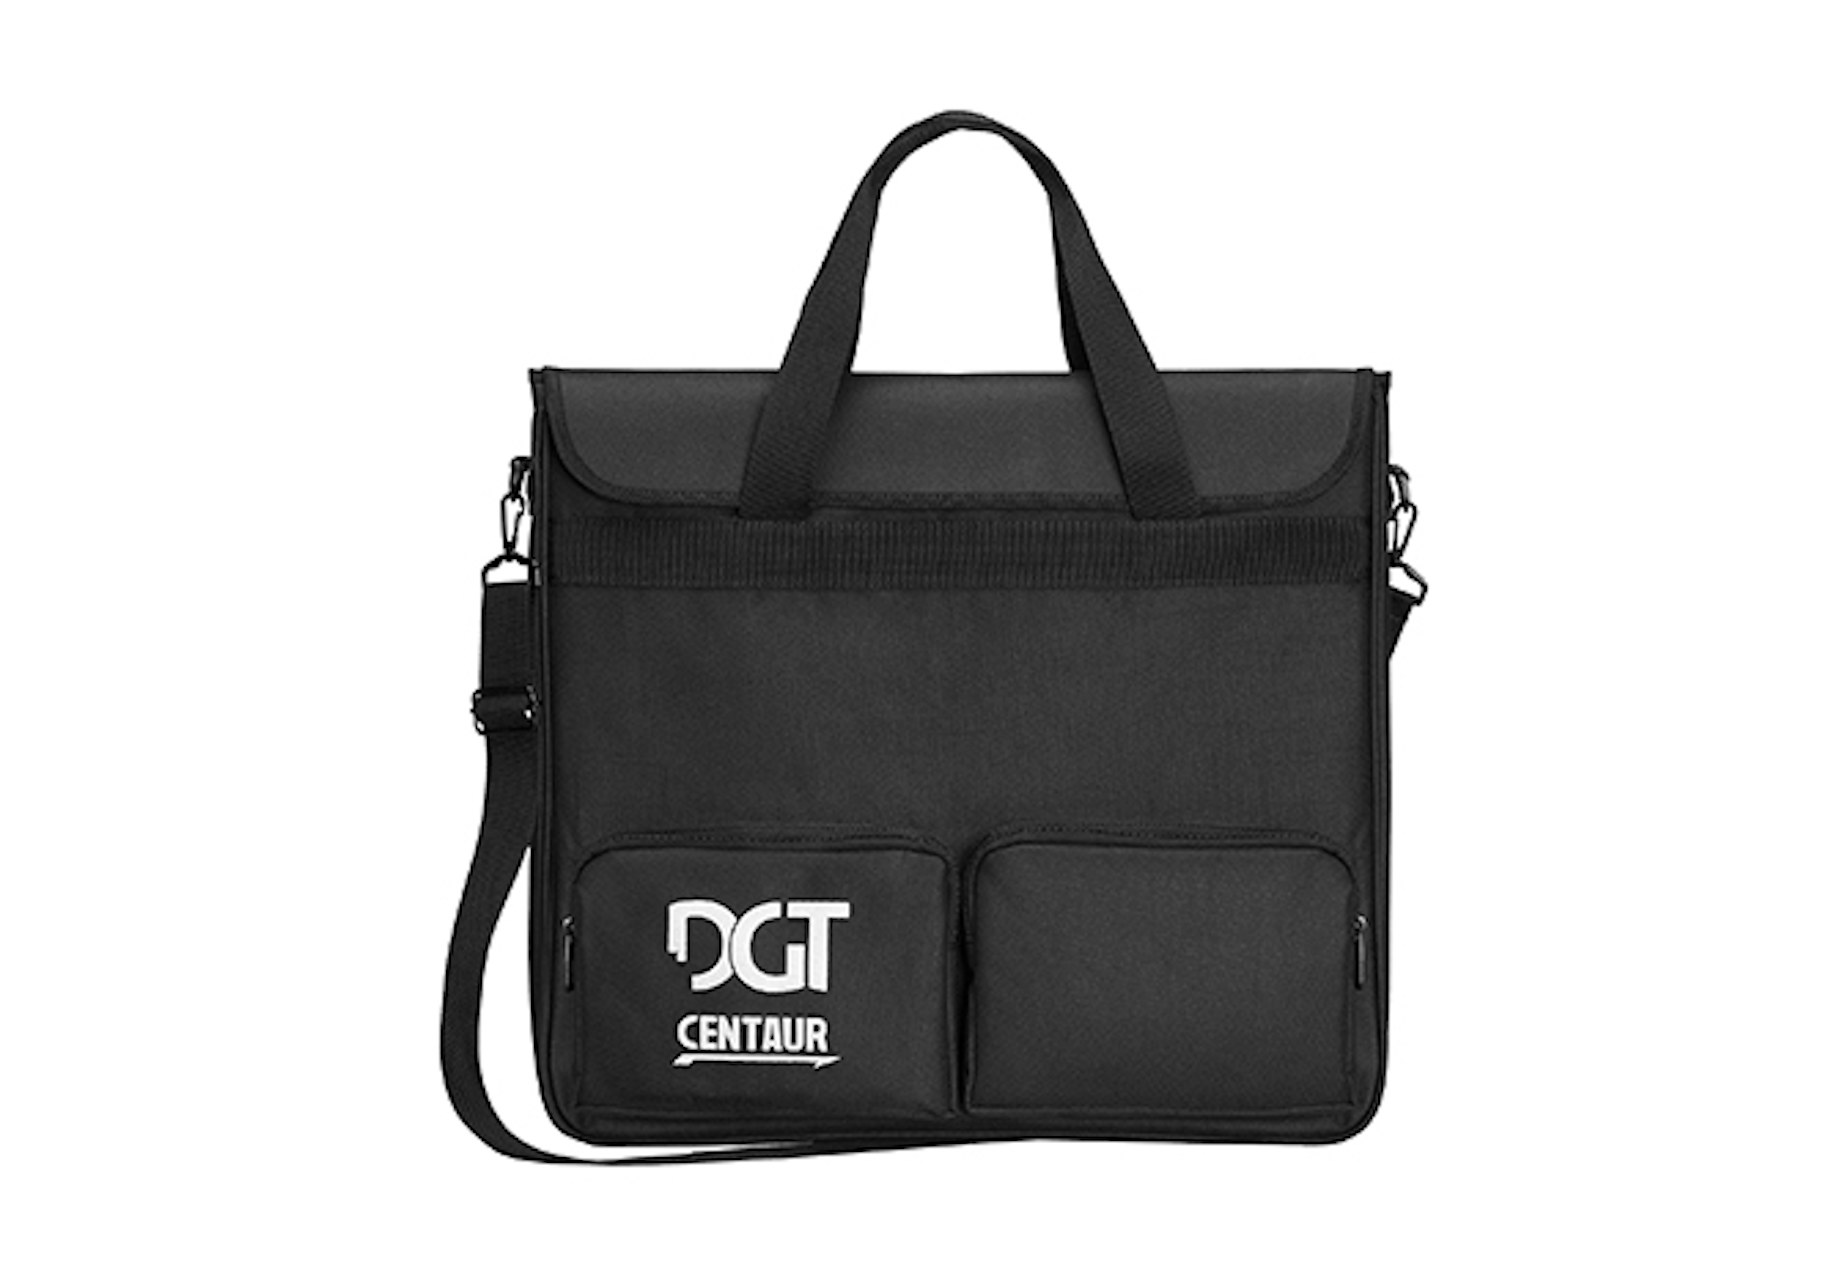 black bag with two front pockets and top handle